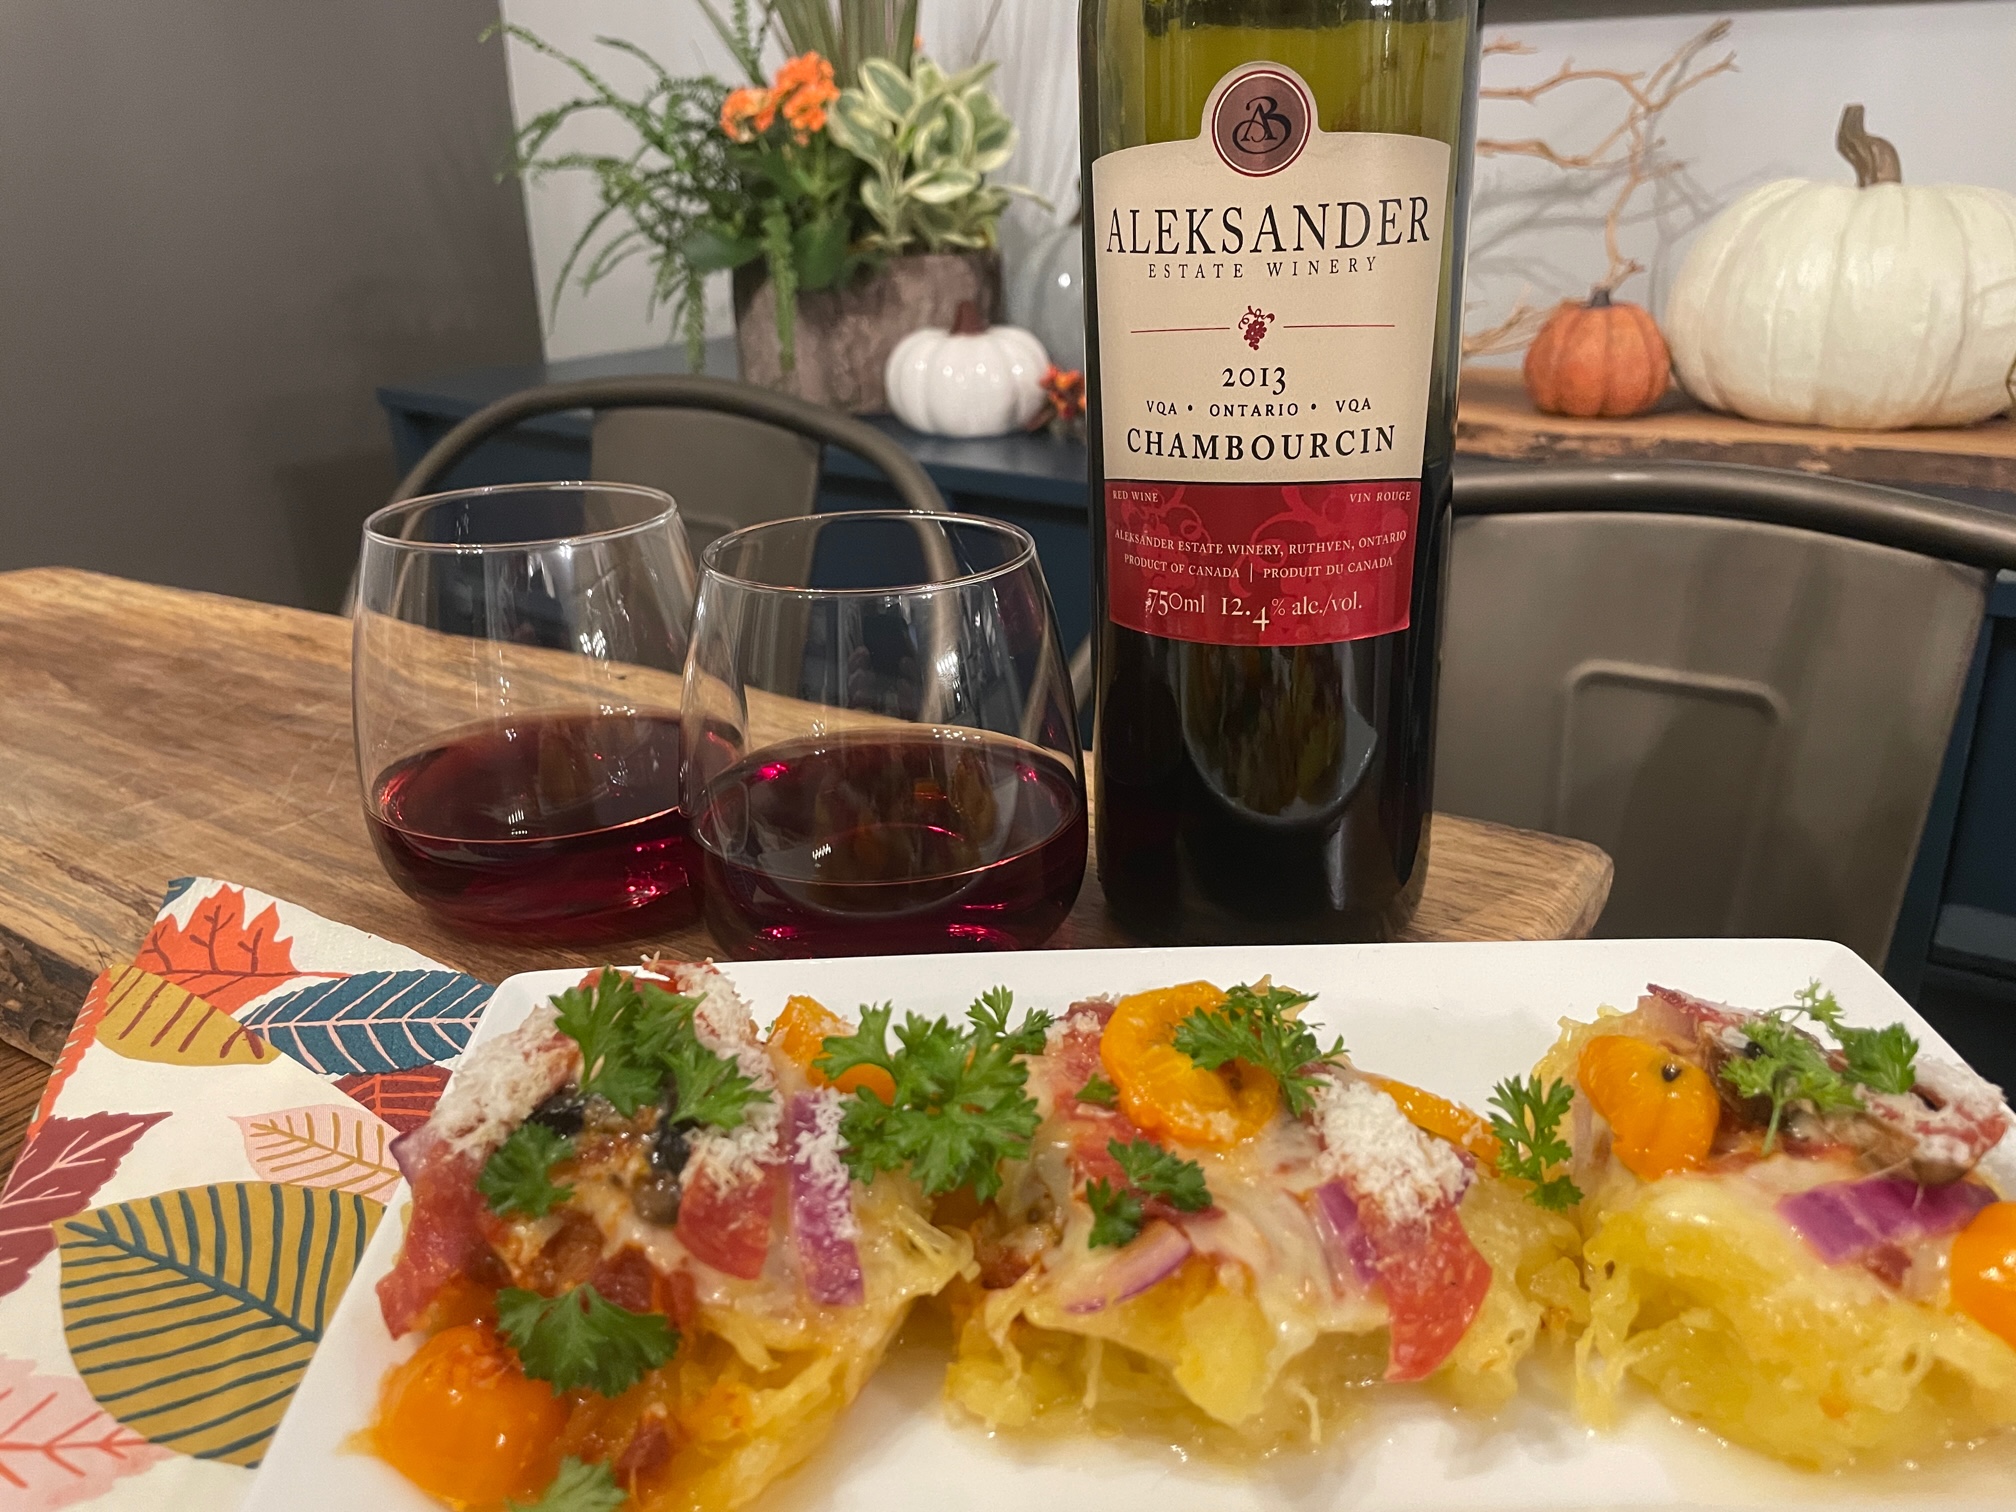 Featured image for “Aleksander Estate Winery 2013 Chambourcin with Spaghetti Squash Pizza Bundles”